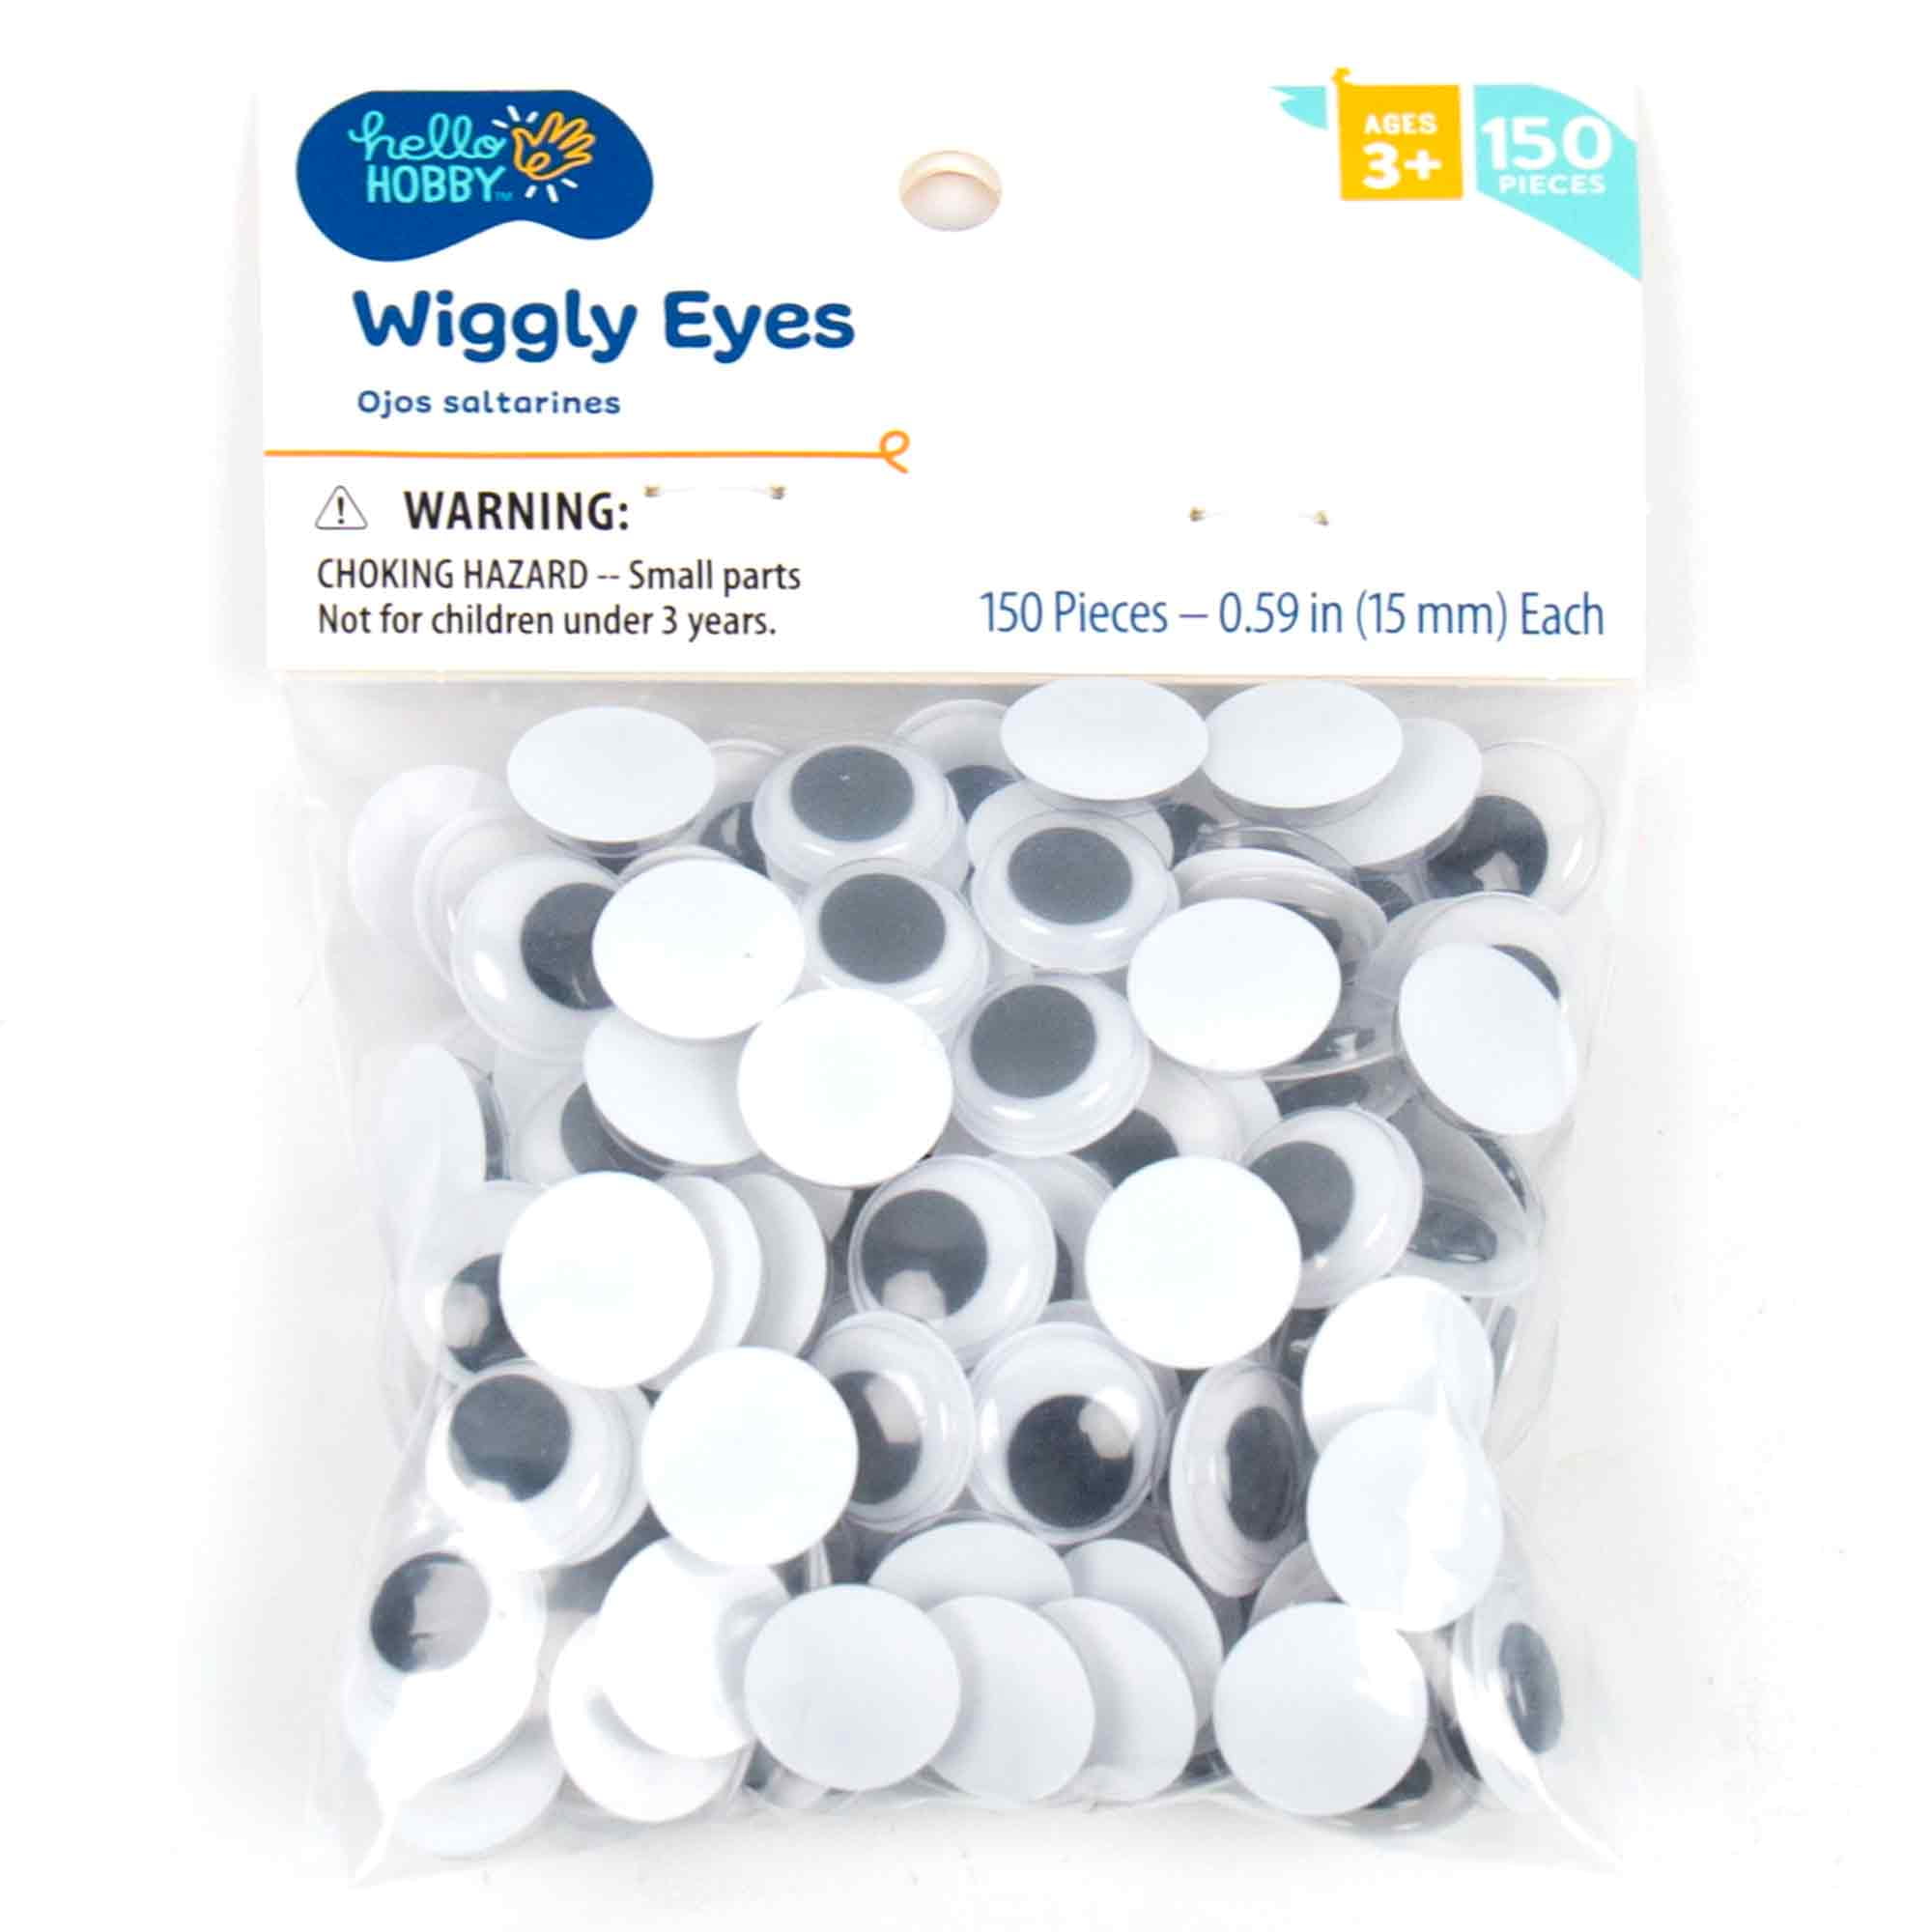 Hello Hobby Fun Glitter Sticker Eyes and Googly Eyes, Multi-Color, 30 Pair  